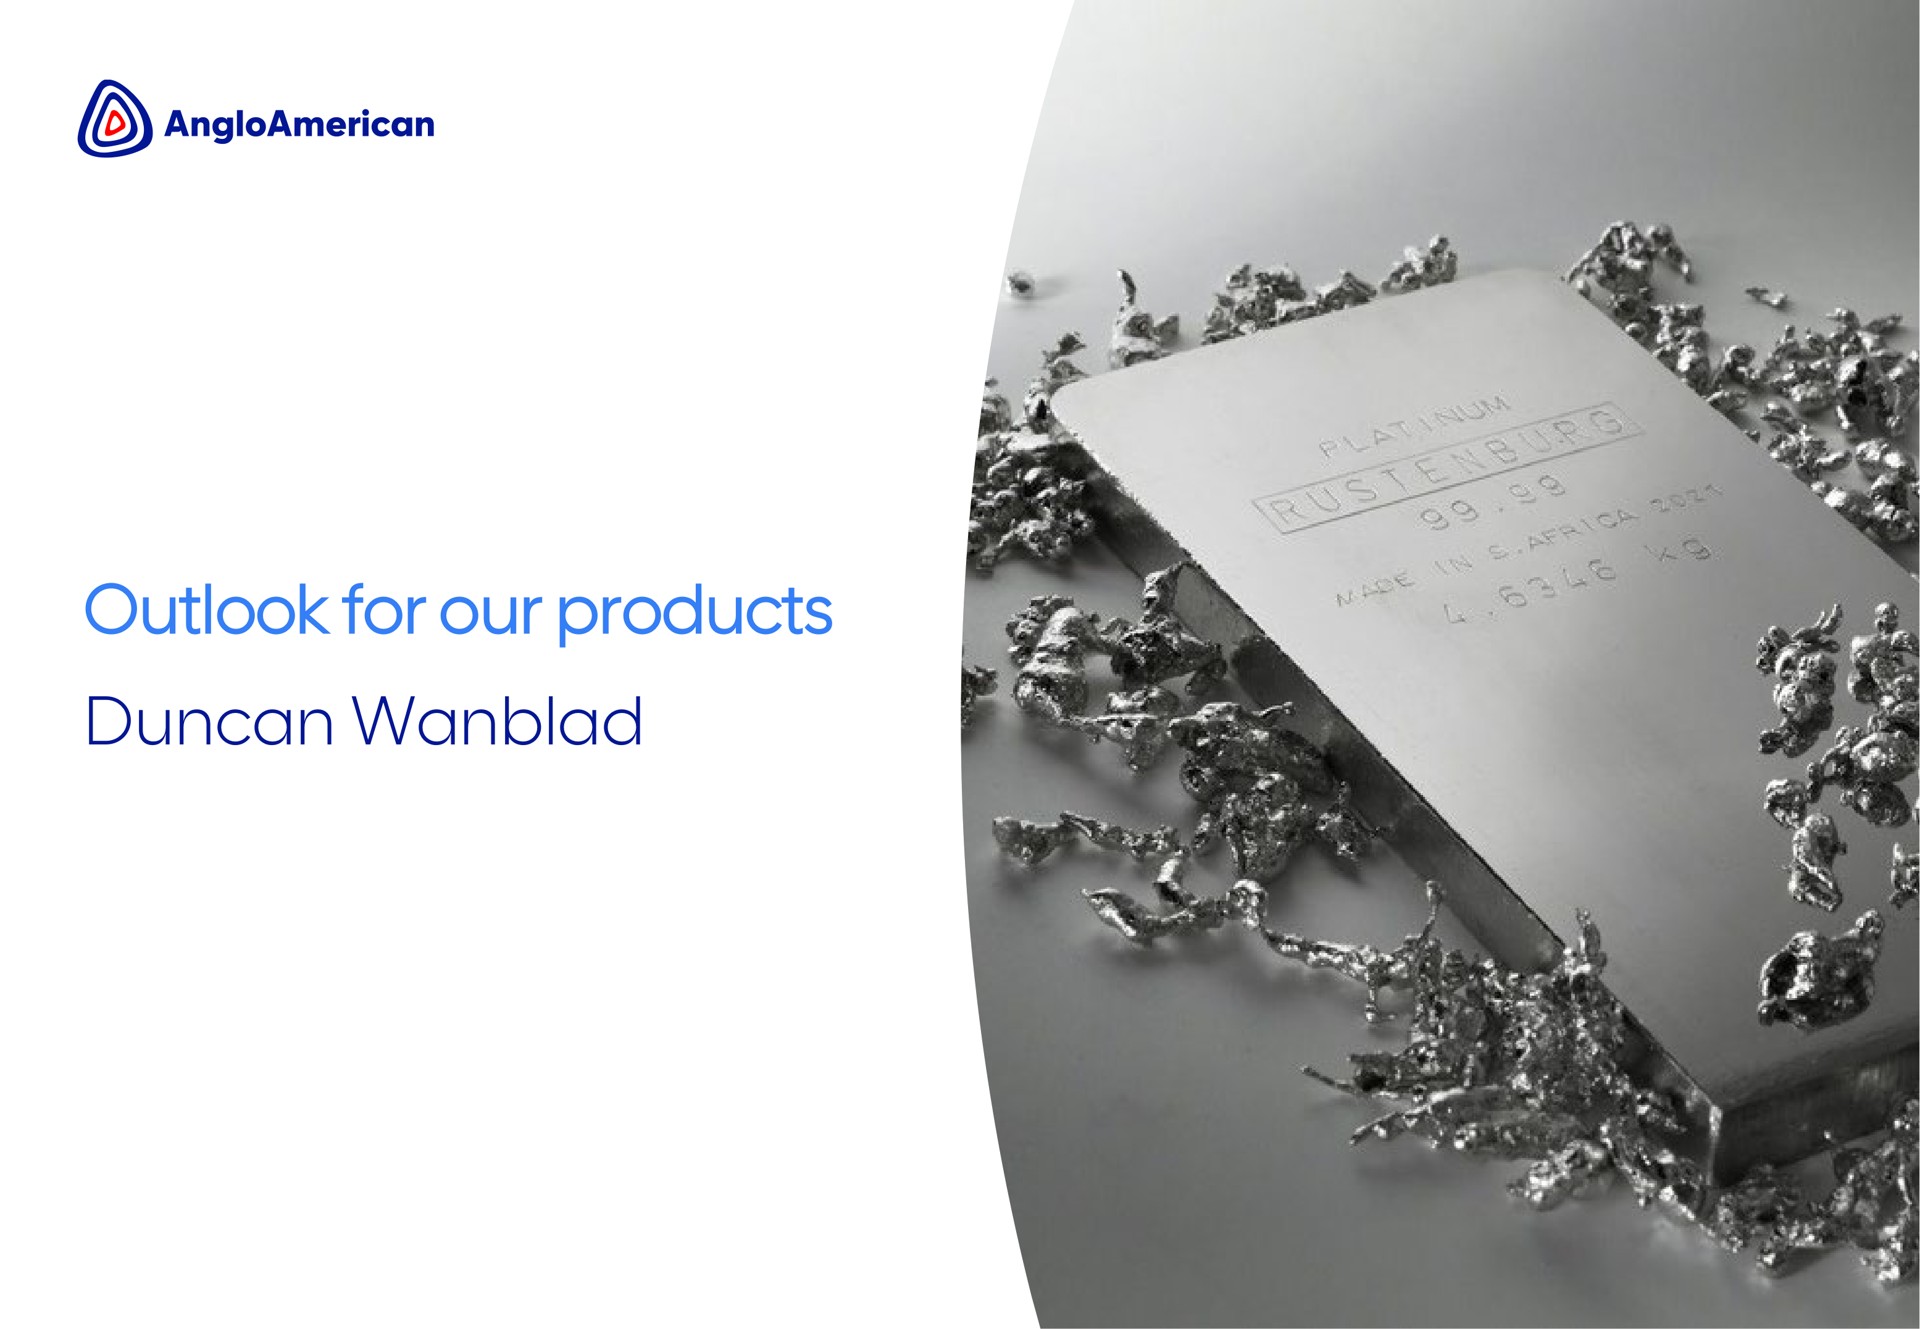 outlook for our products | AngloAmerican